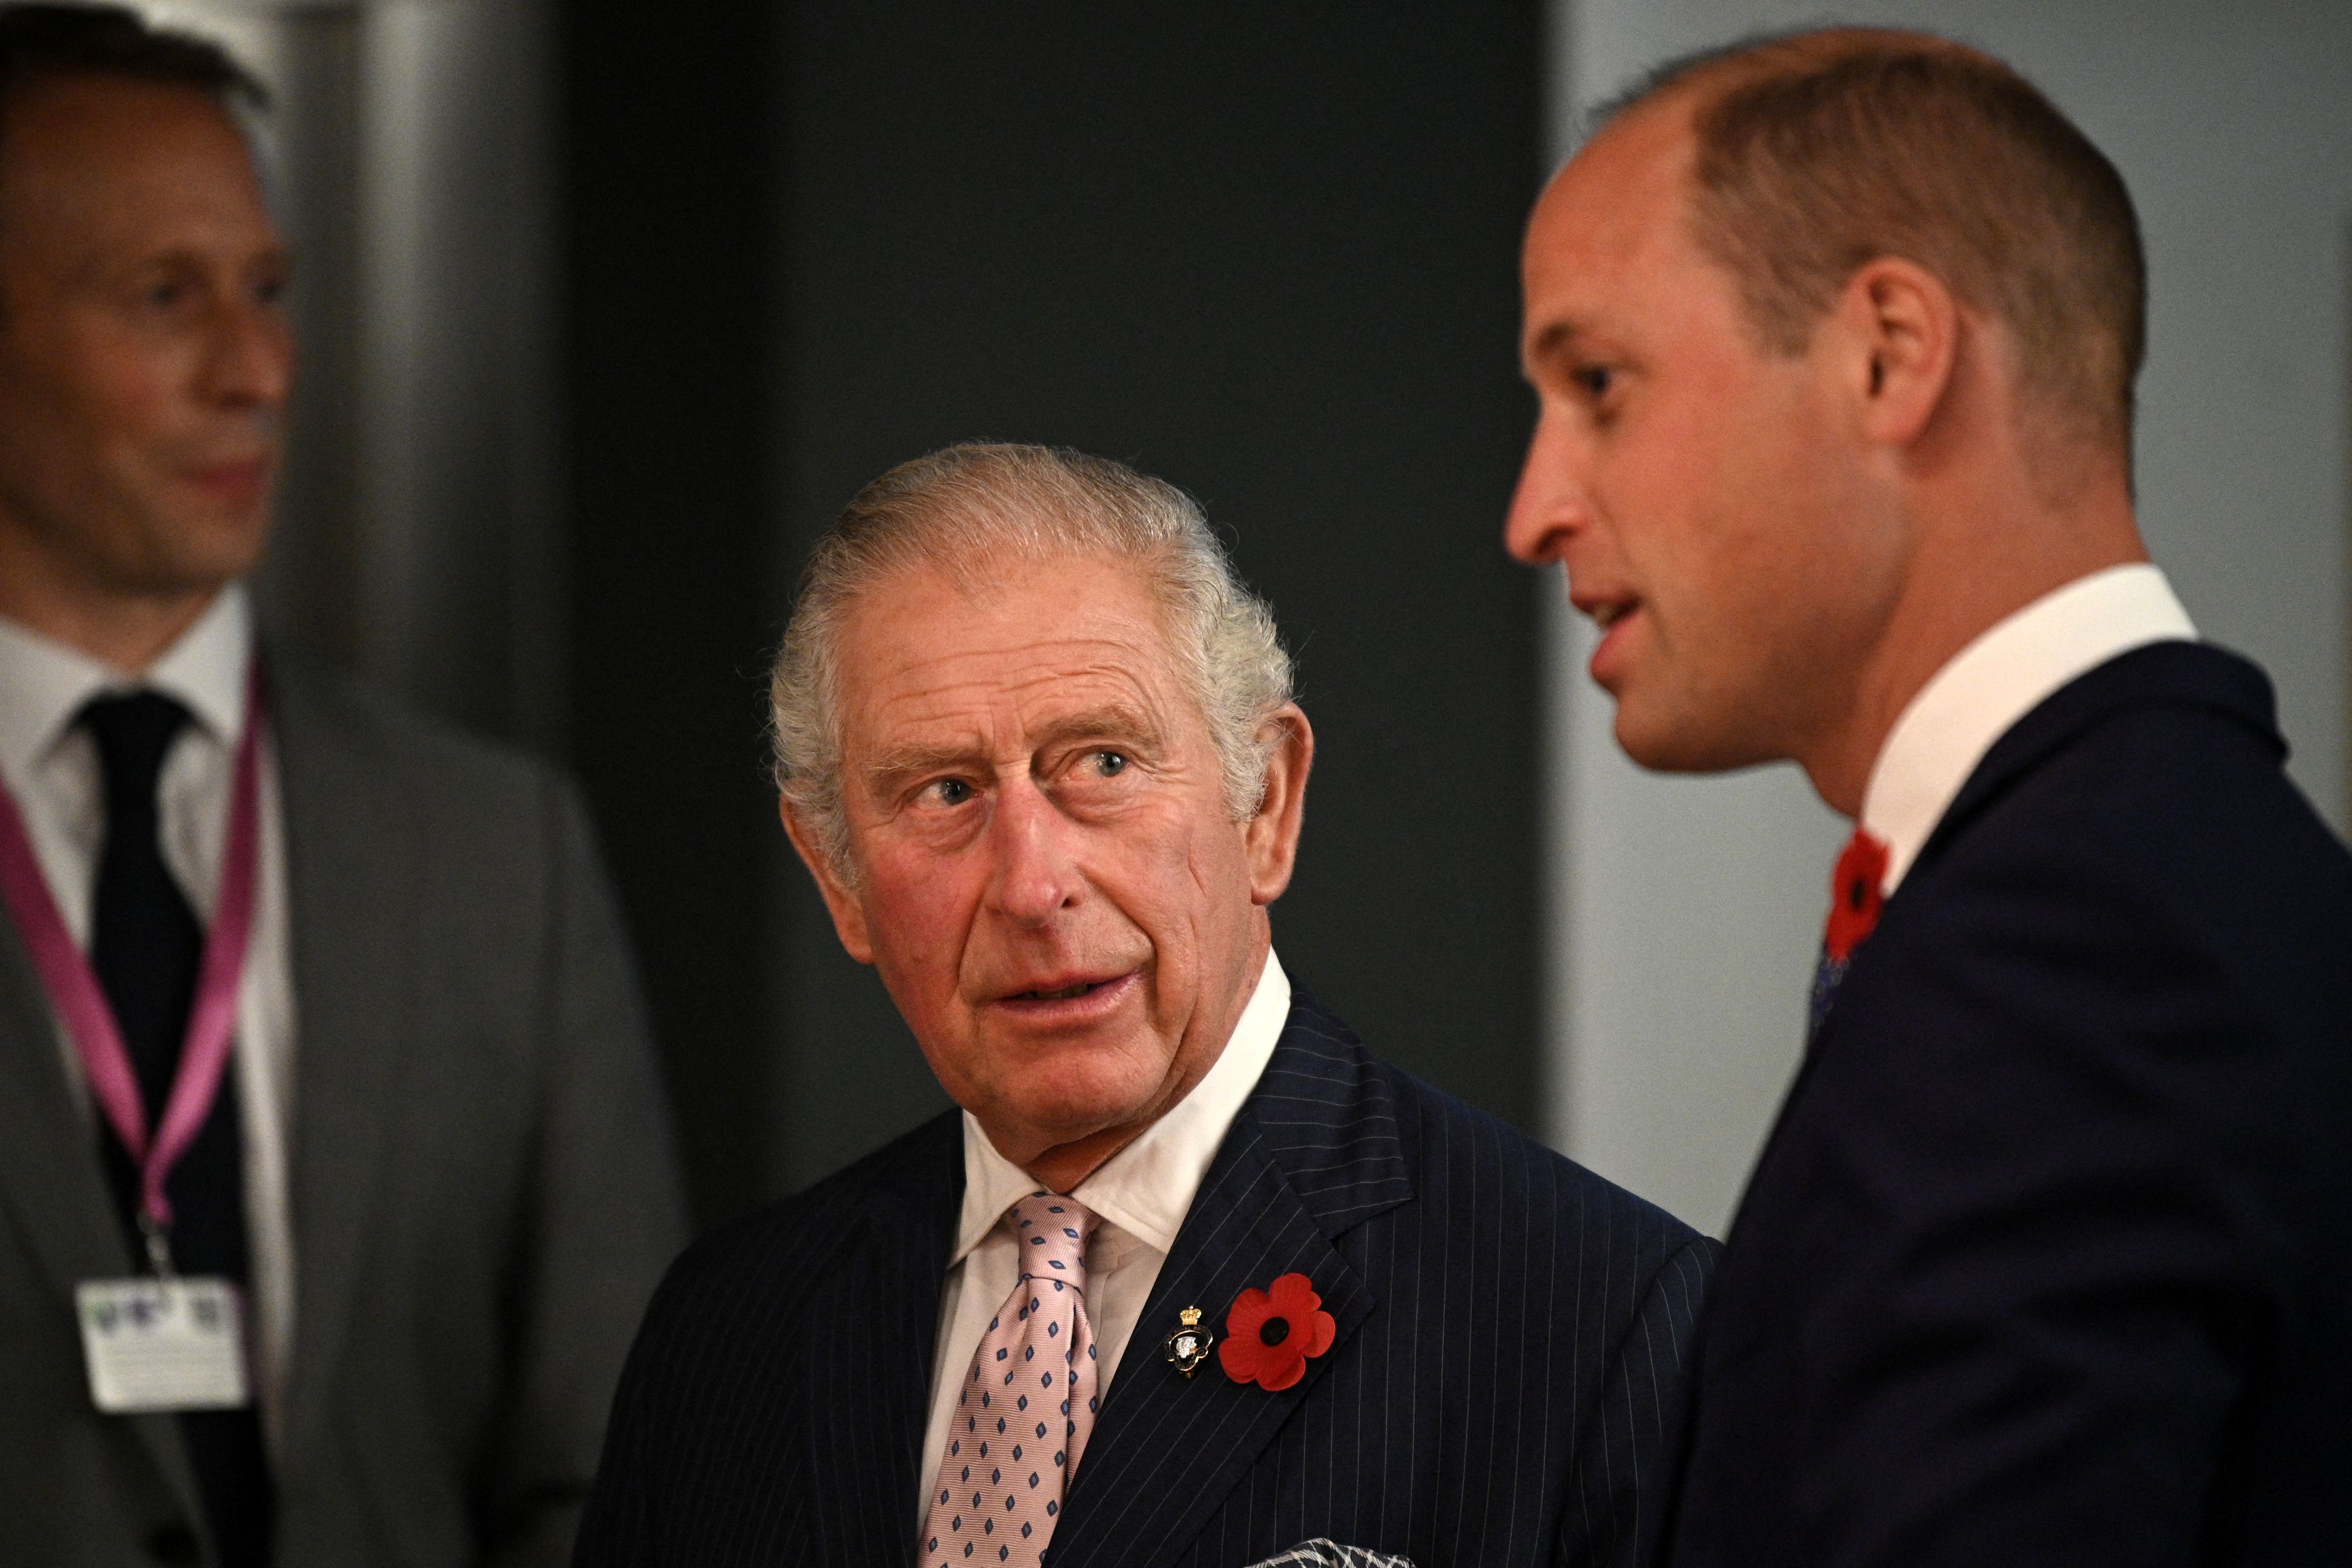 Britain's Prince Charles reacts as he speaks with Prince William at a reception for the key members of the Sustainable Markets Initiative and the Winners and Finalists of the first Earthshot Prize Awards in Glasgow, Scotland on November 1, 2021. | Source: Getty Images